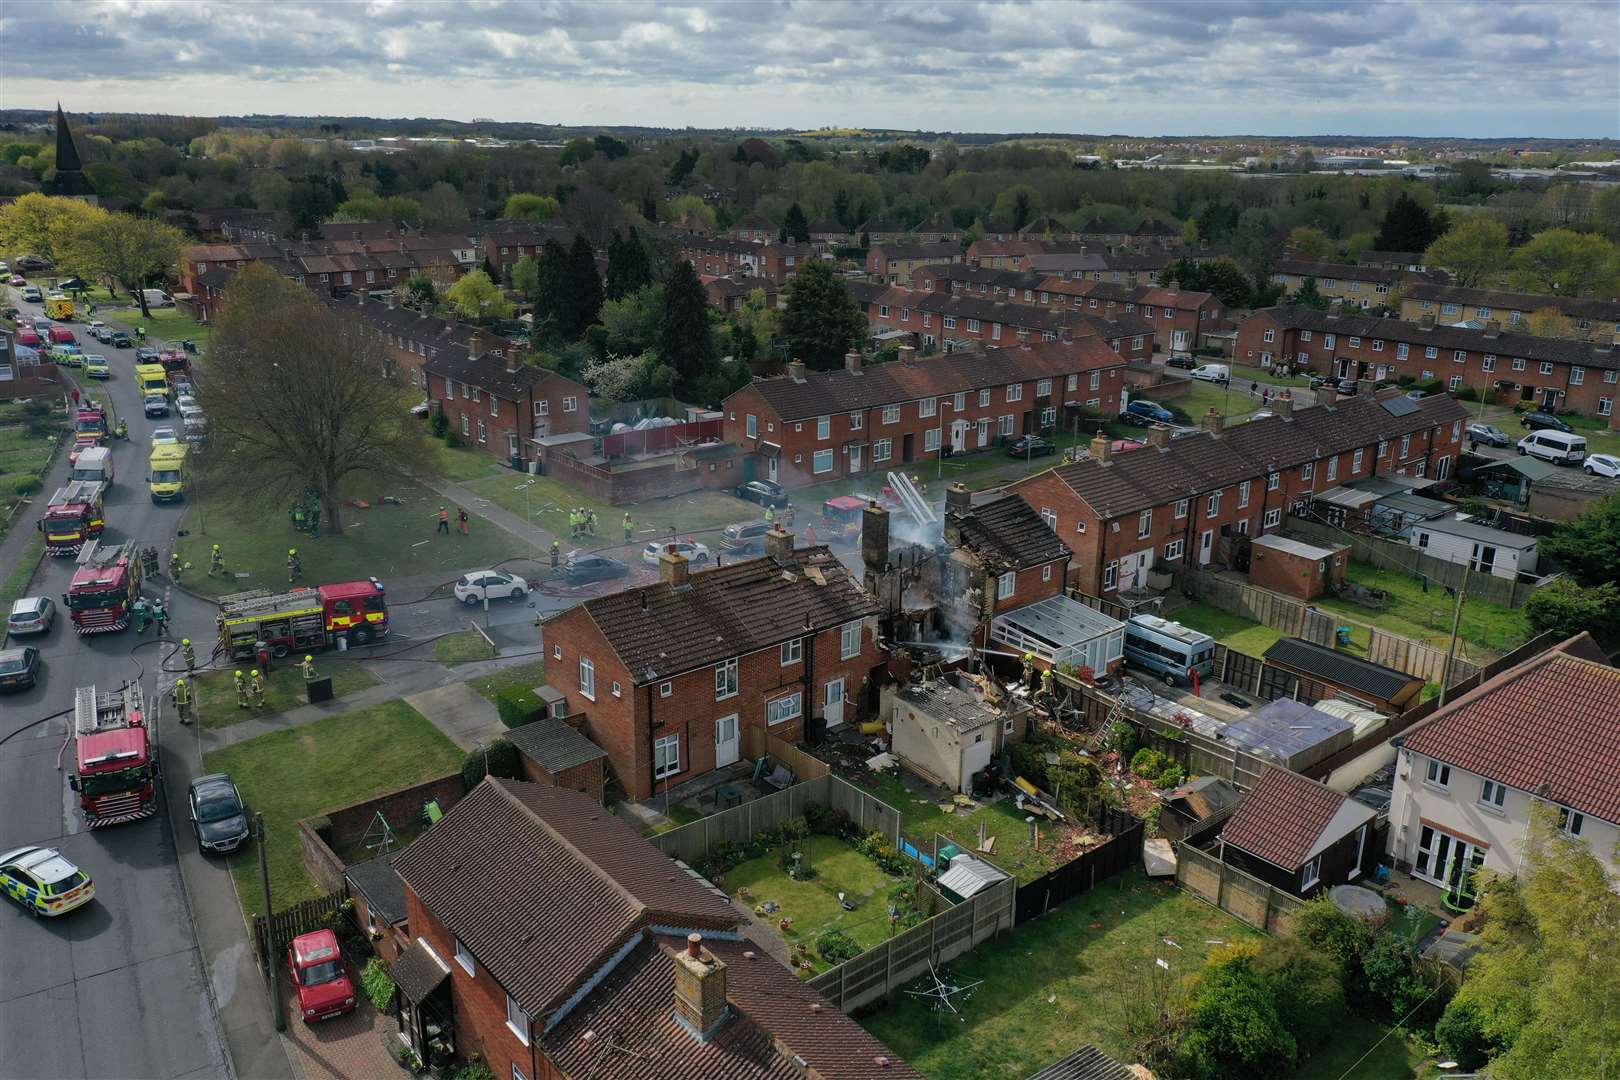 The explosion in Mill View, Willesborough Picture: UKNIP